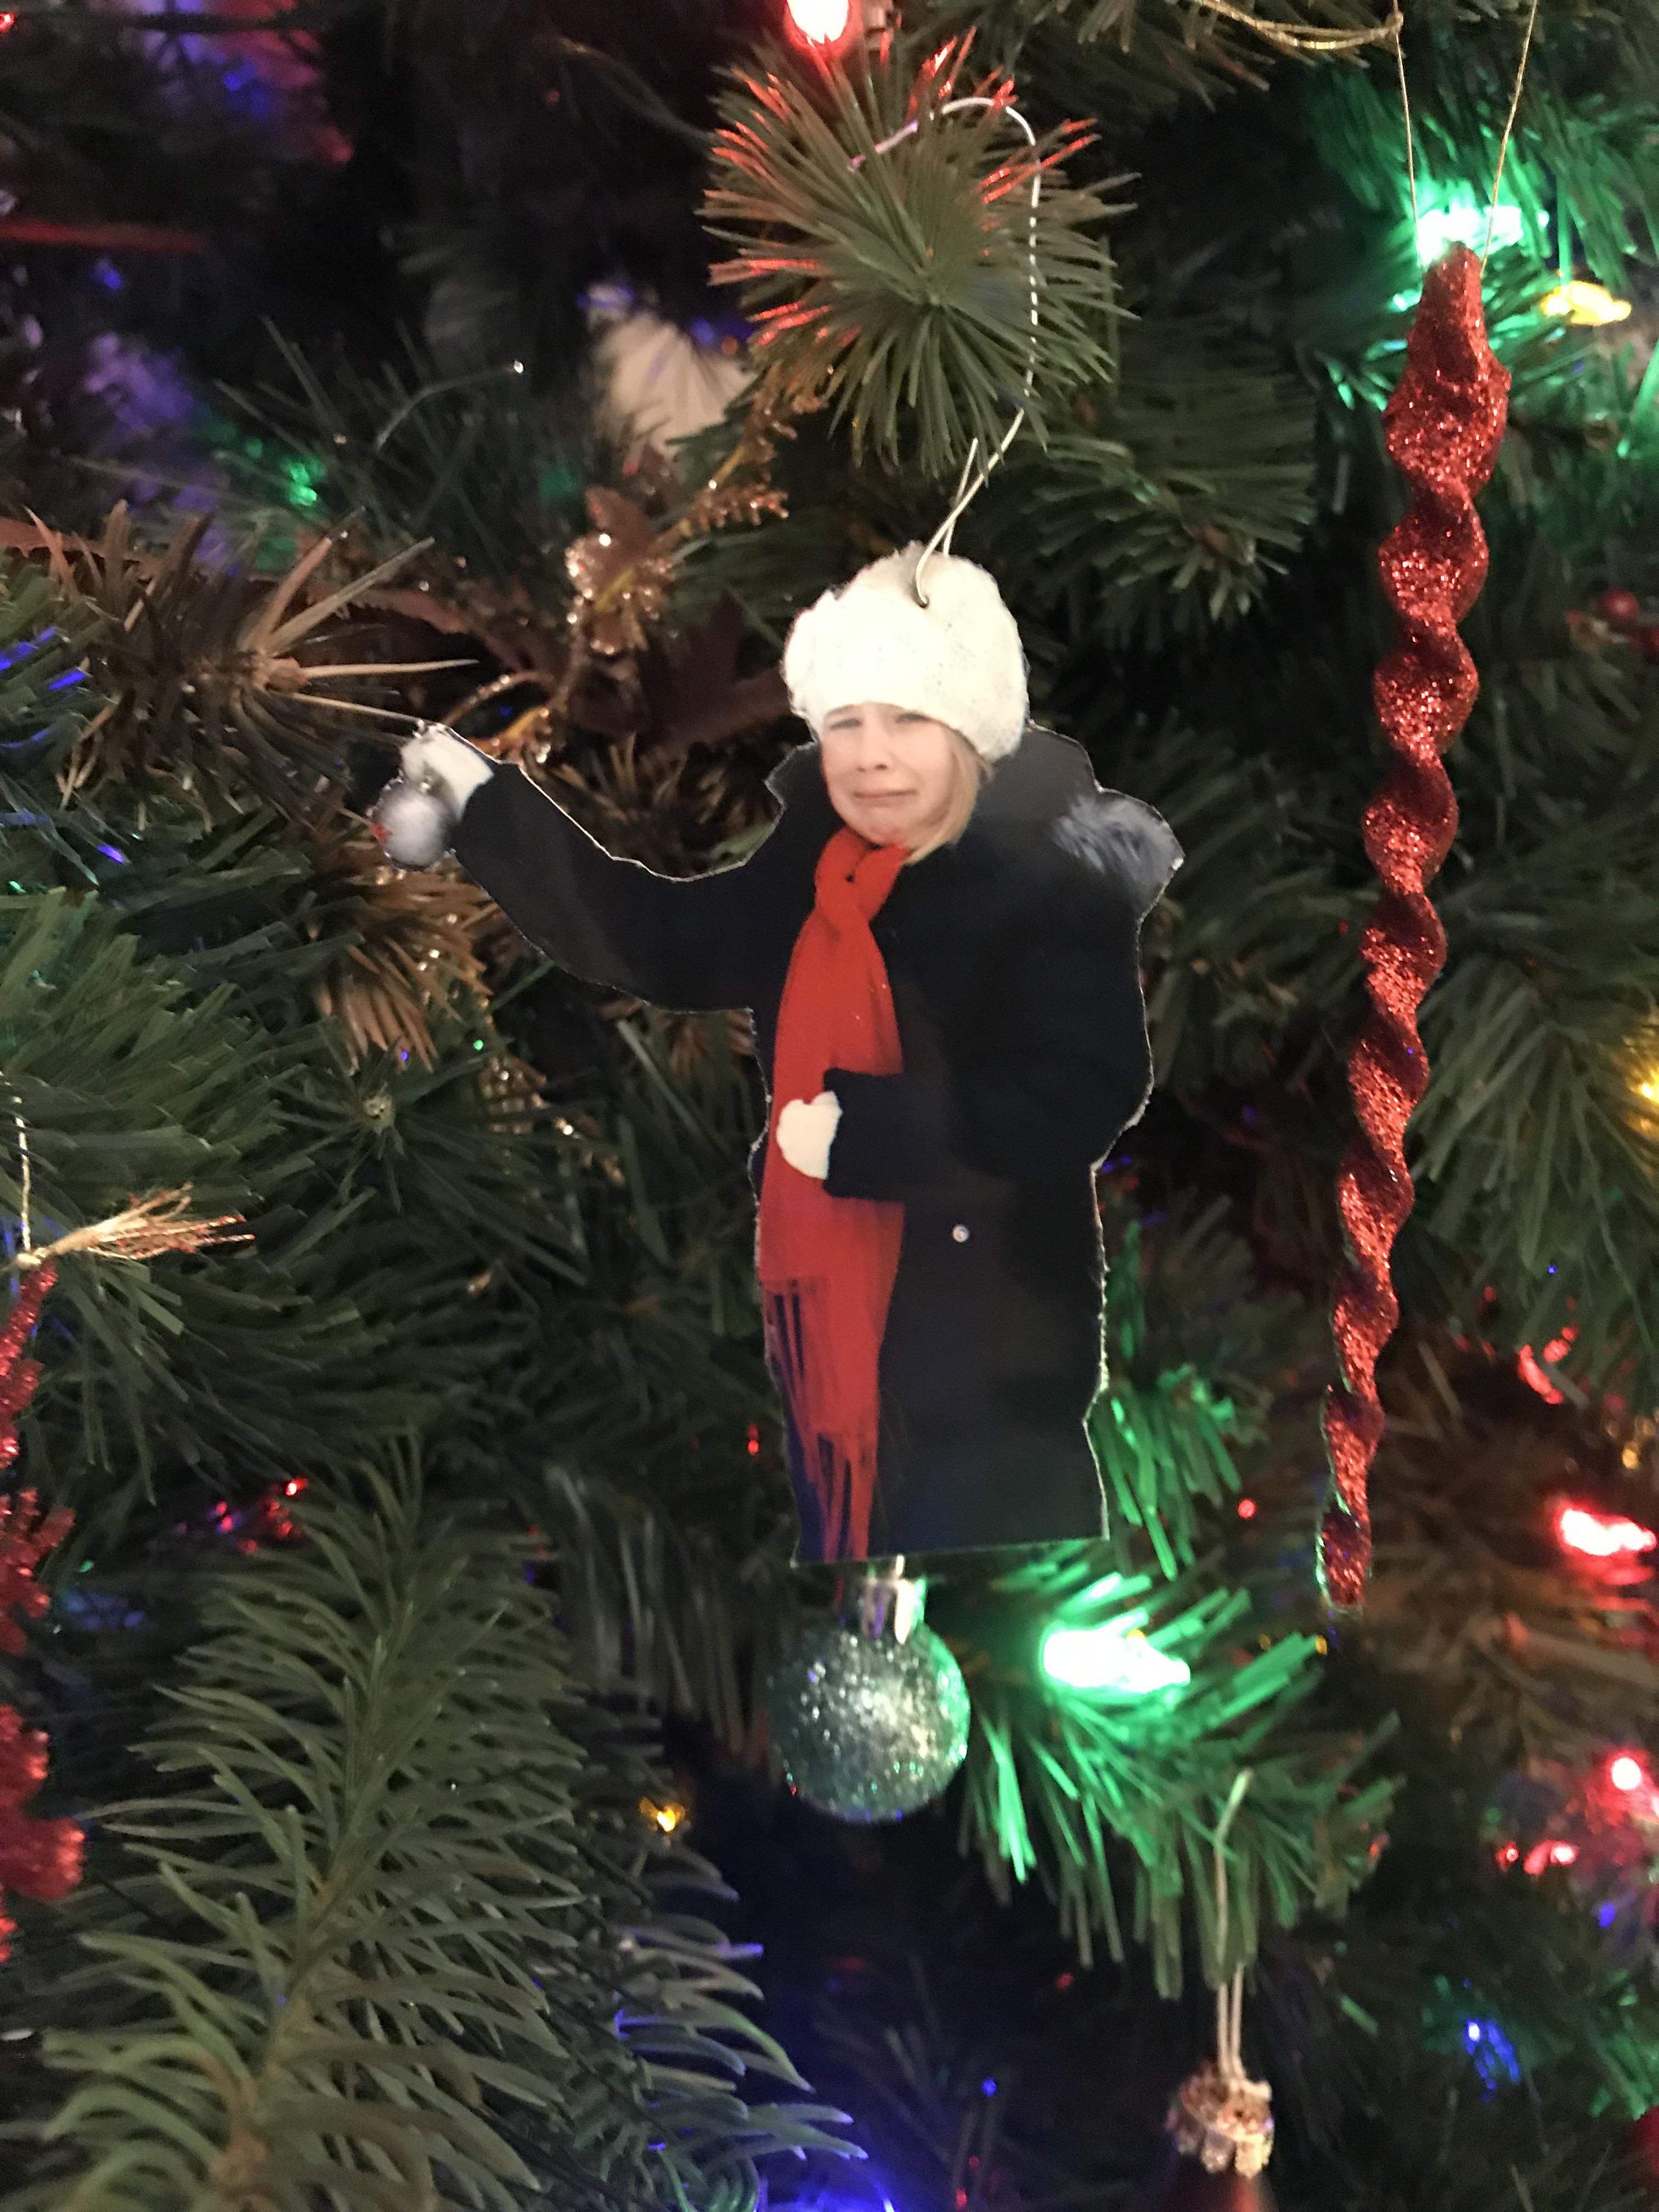 My step-daughter had a melt down while taking Christmas pictures a few years ago so I made this ornament that we now hang on the tree every year.